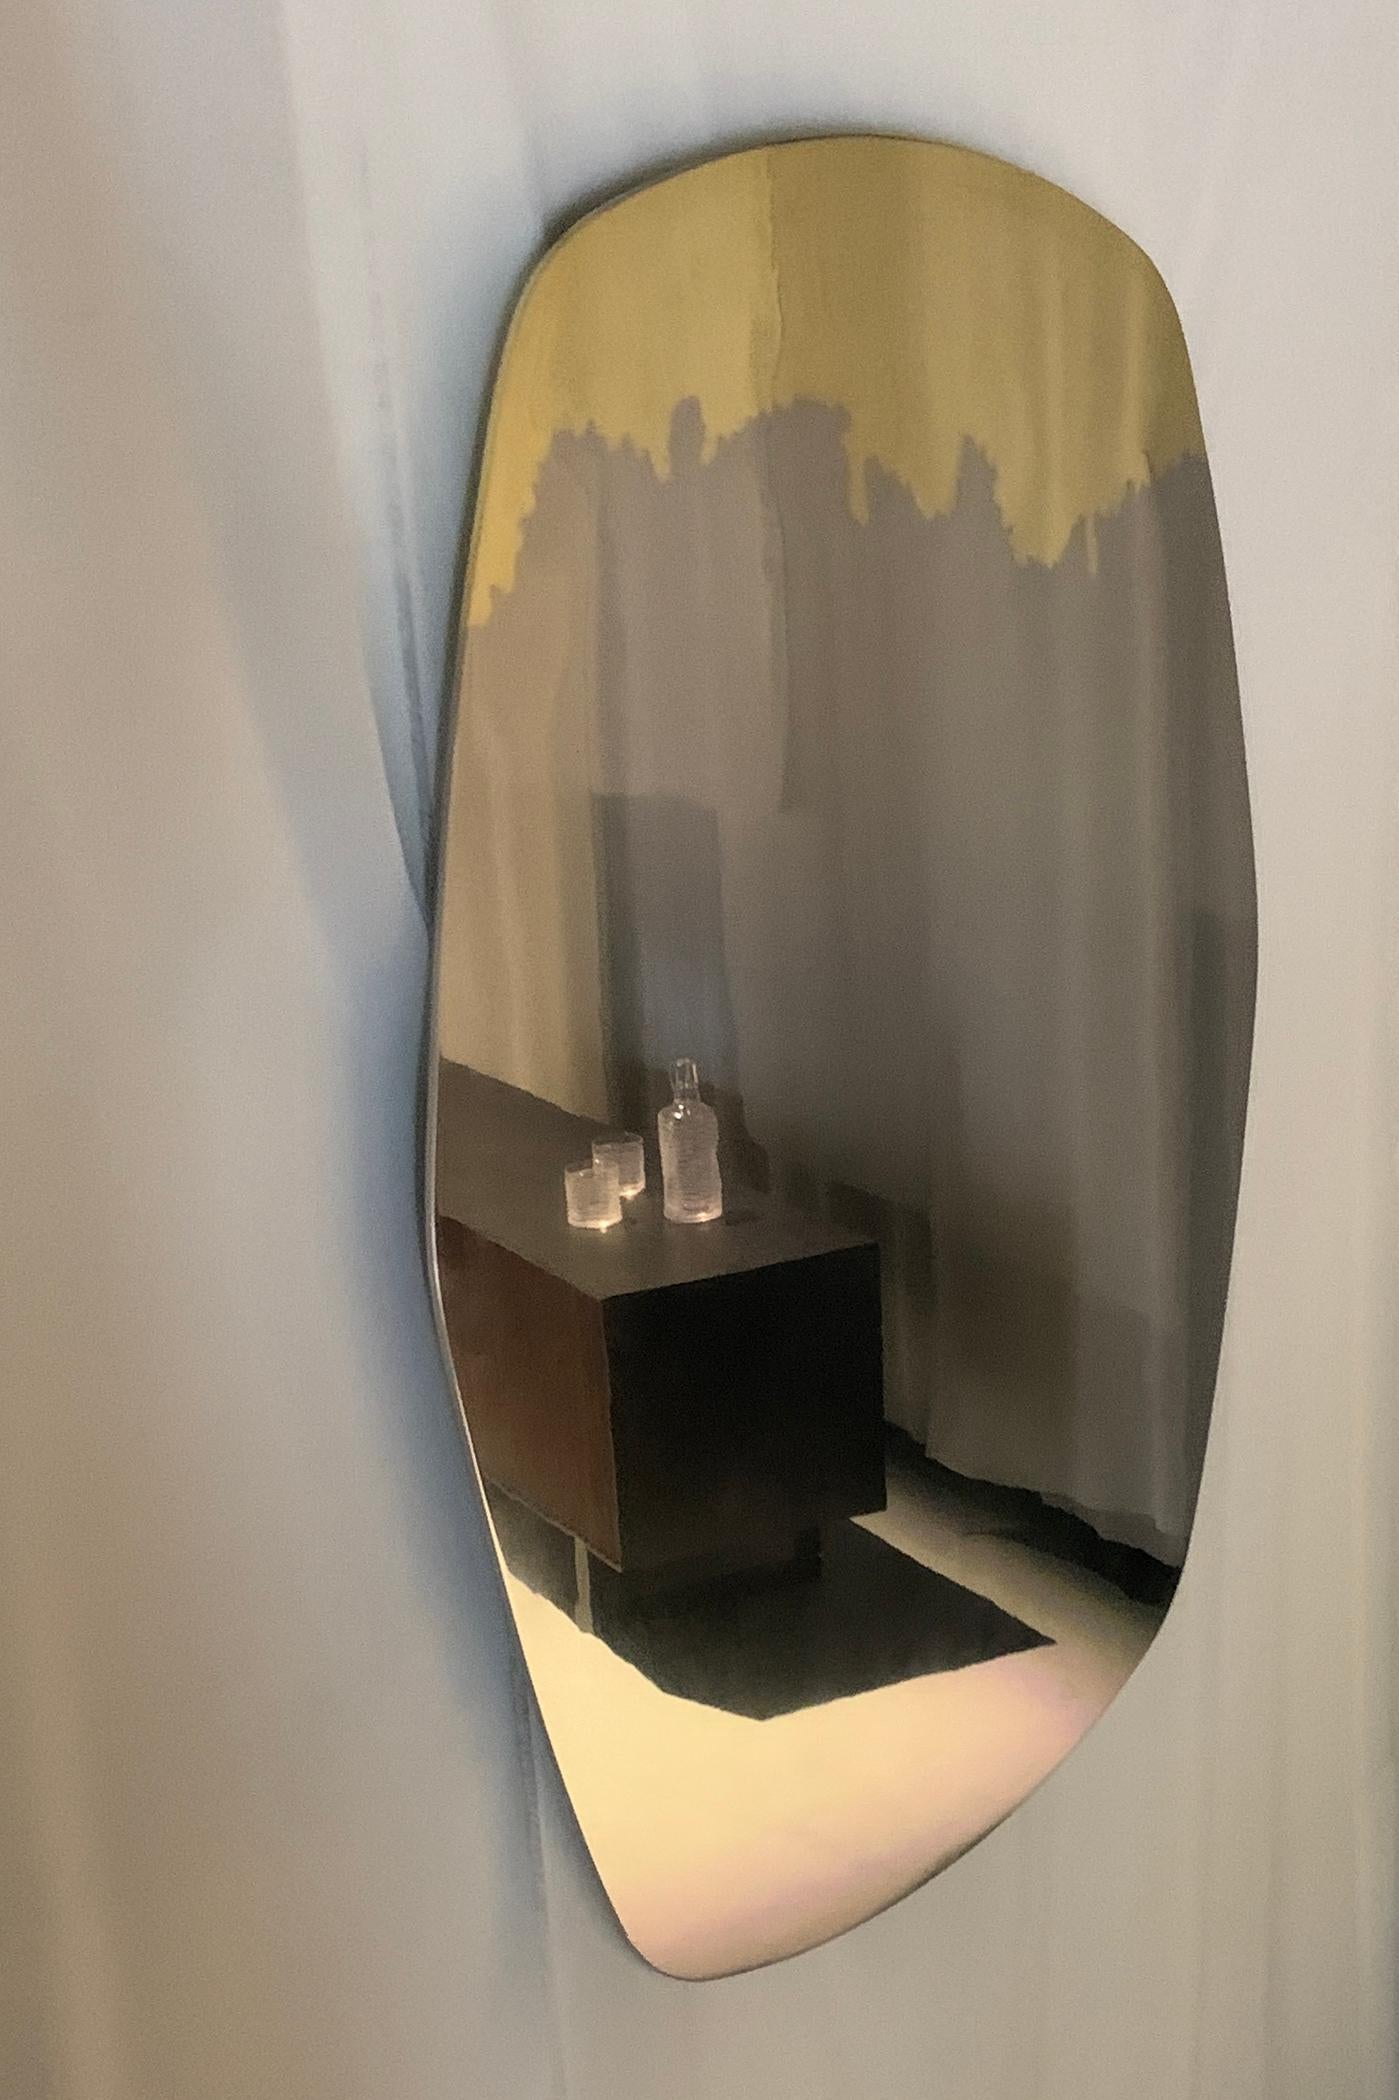 We have launched a new polished stainless steel and brass mirror to extend our successful Transition collection, featuring a unique, artistic mirror polished finish, crafted from brass and stainless steel.

At 4 ft x 3 1/2 ft this is a true